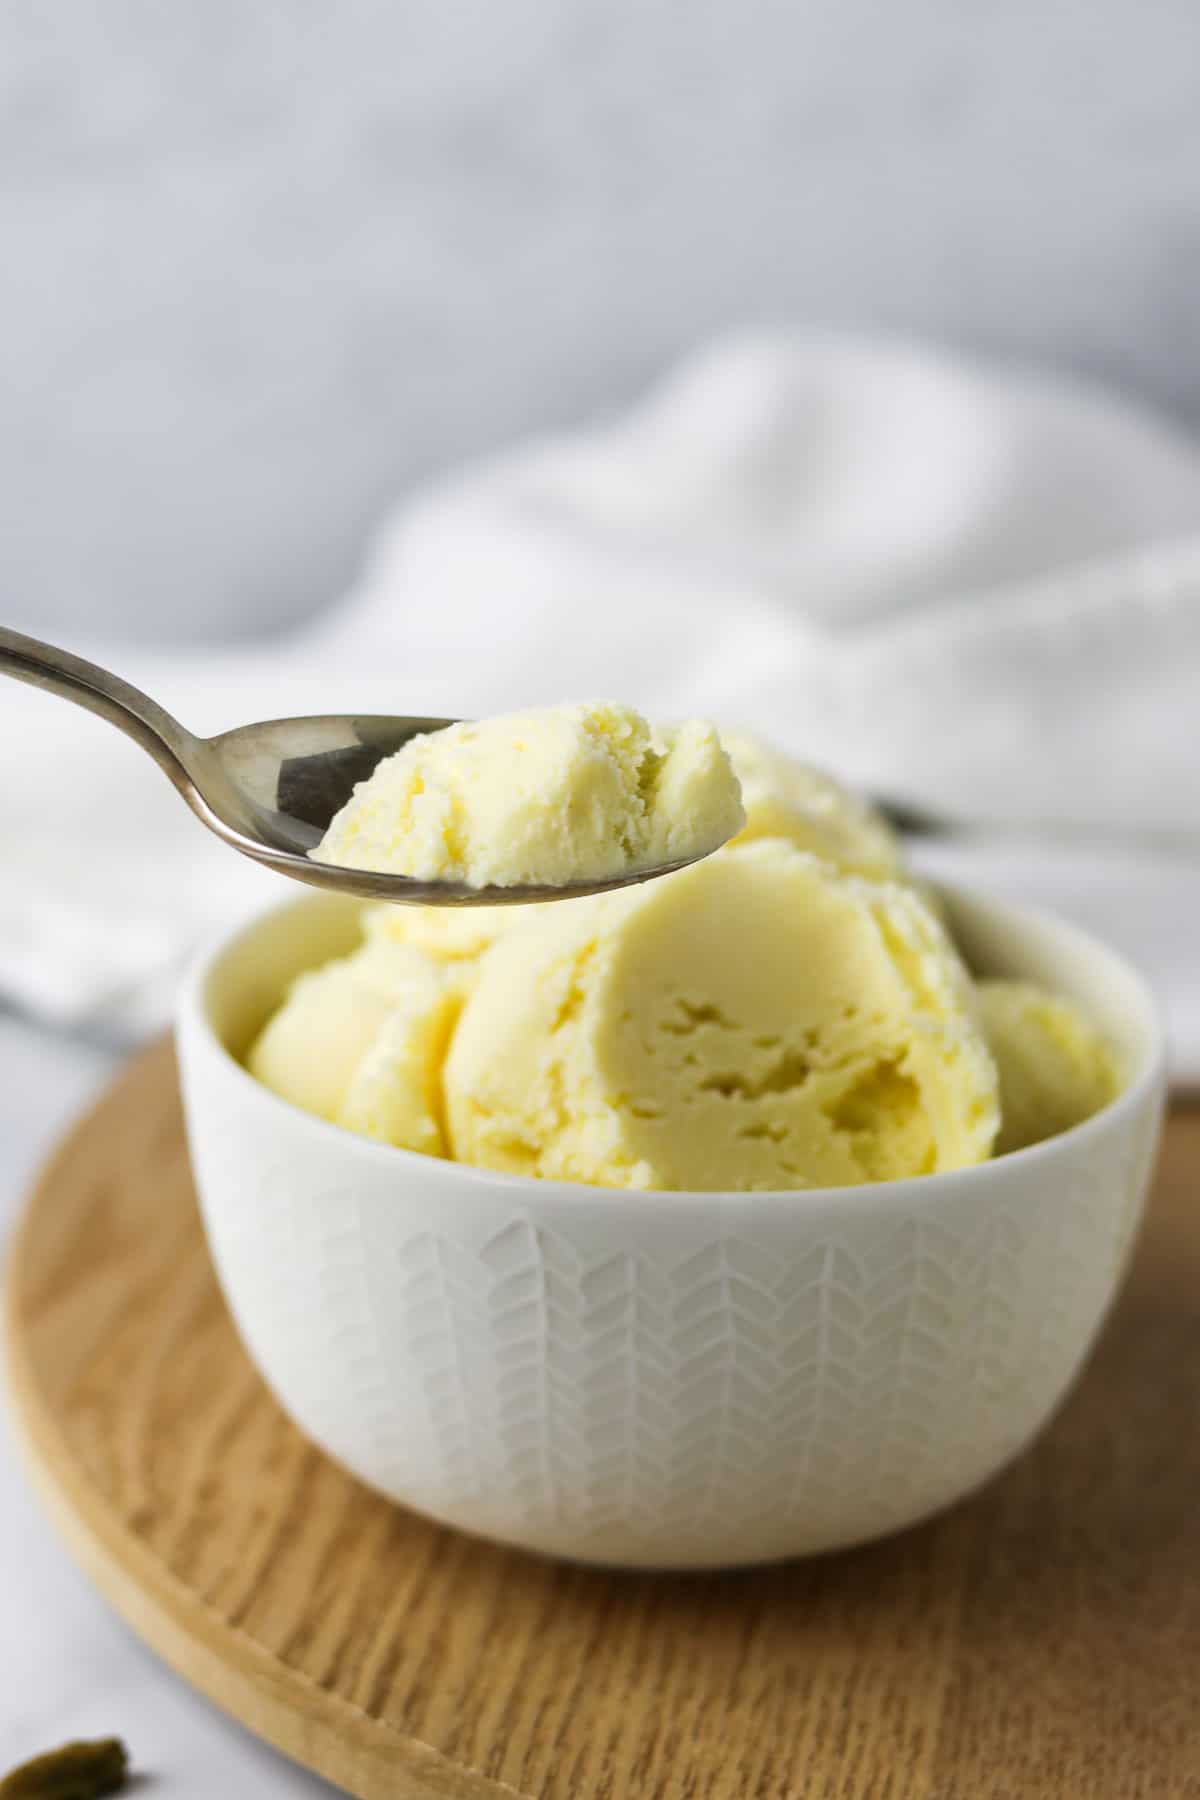 Cardamom Ice Cream in a bowl with a spoon on a wooden surface.